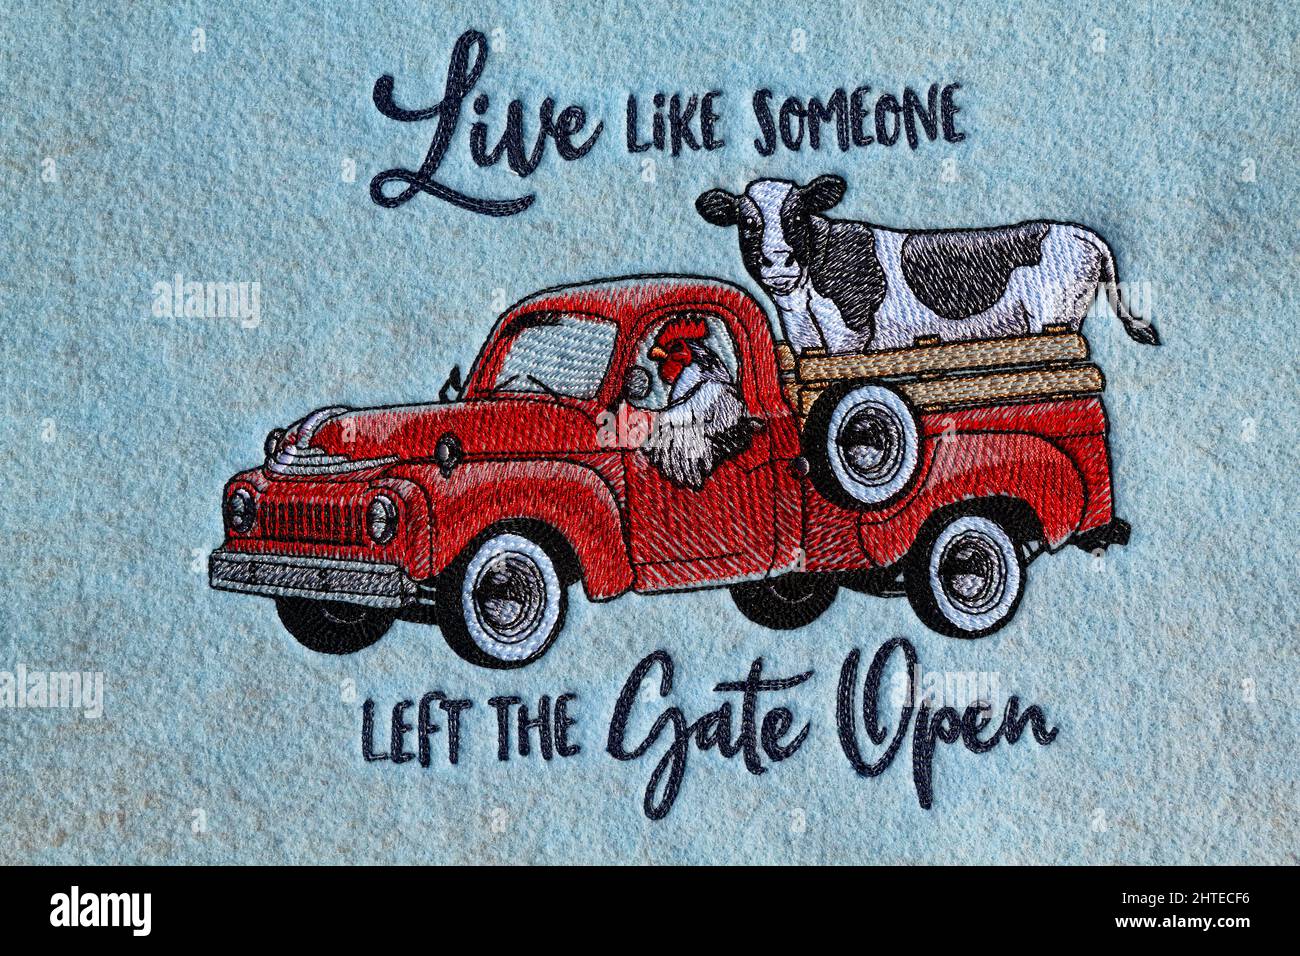 machine embroidery,text, Live like someone left the gate open, words, red farm truck, rooster driving, cow riding, humorous, blue felt fabric, texture Stock Photo